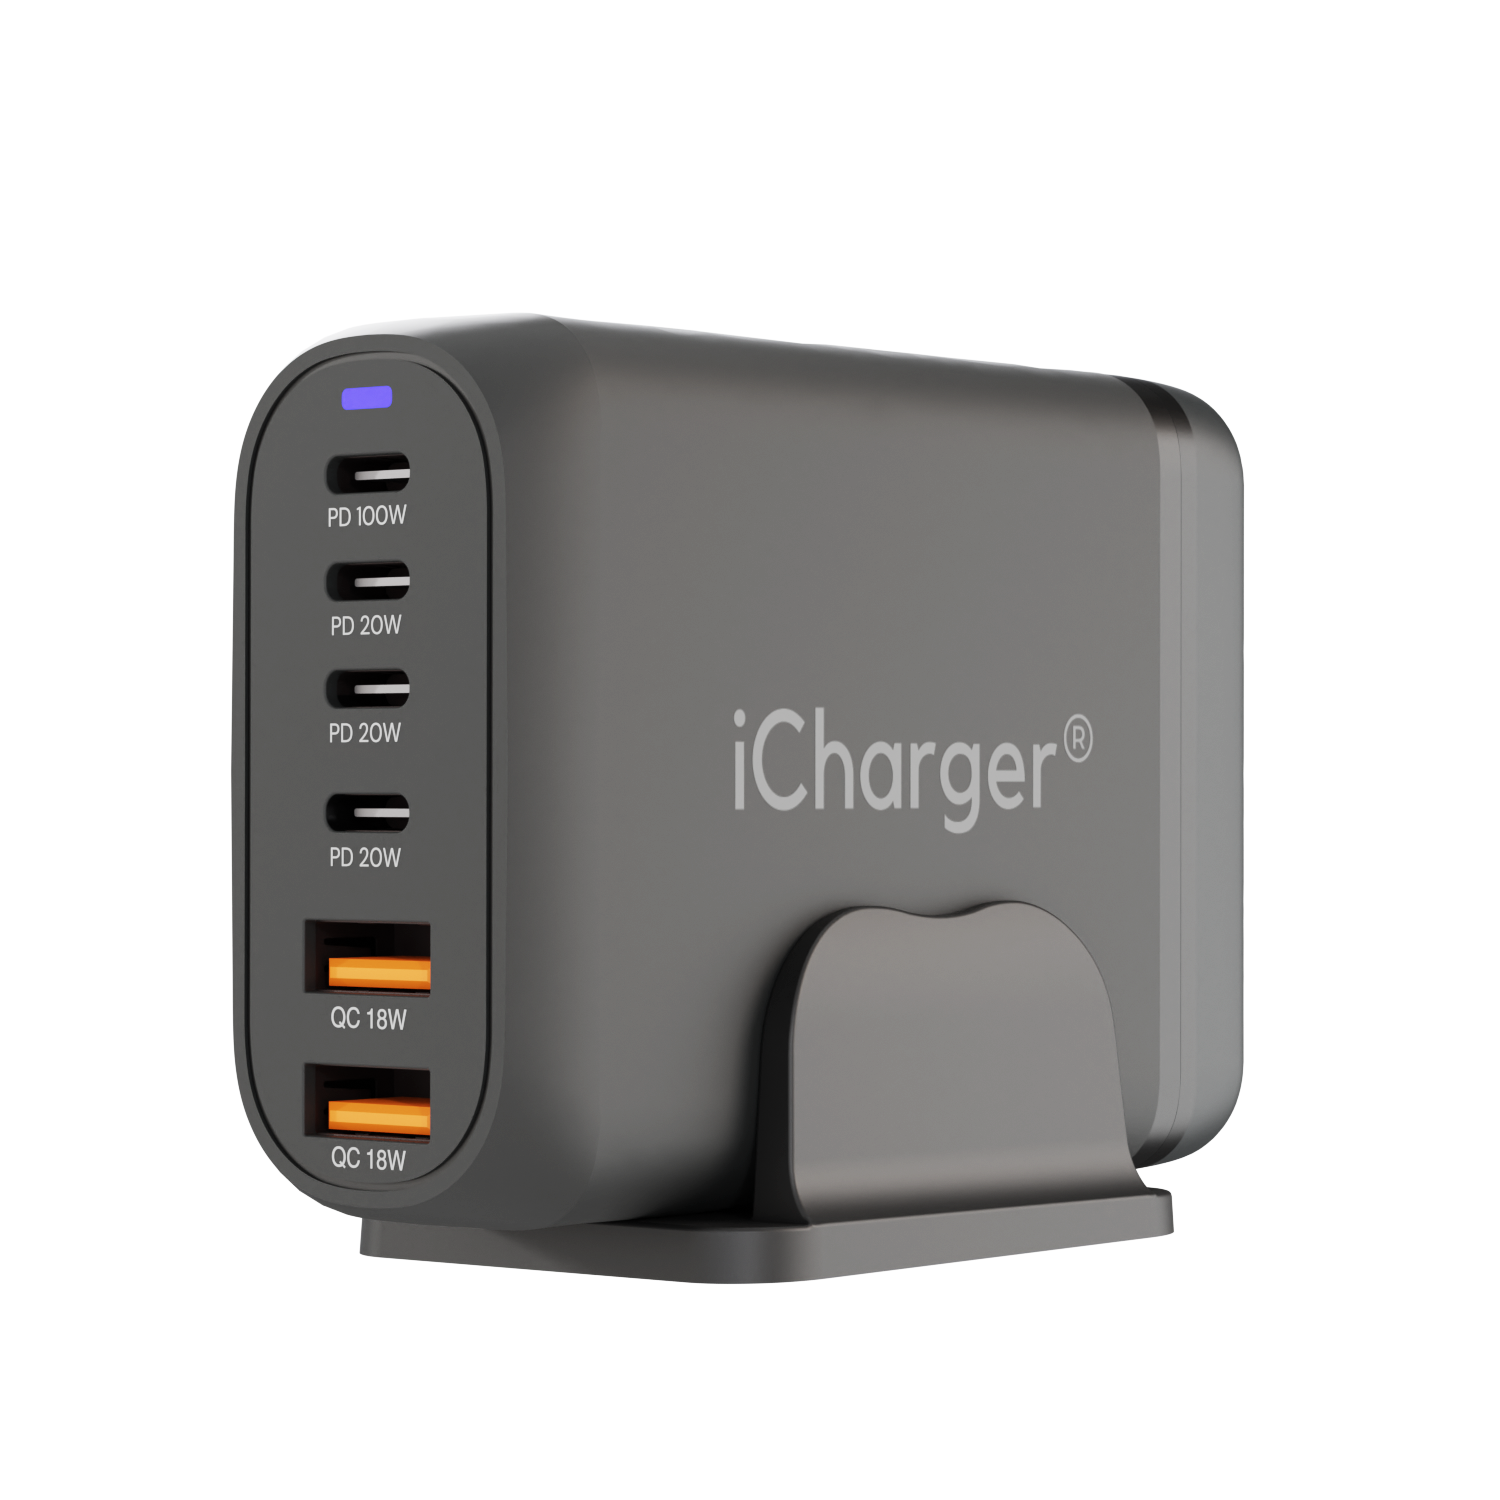 "iCharger 200W GaN3 5-in-1 Desk Power Station featuring USB-C and USB-A ports on a wooden desk with gadgets charging.